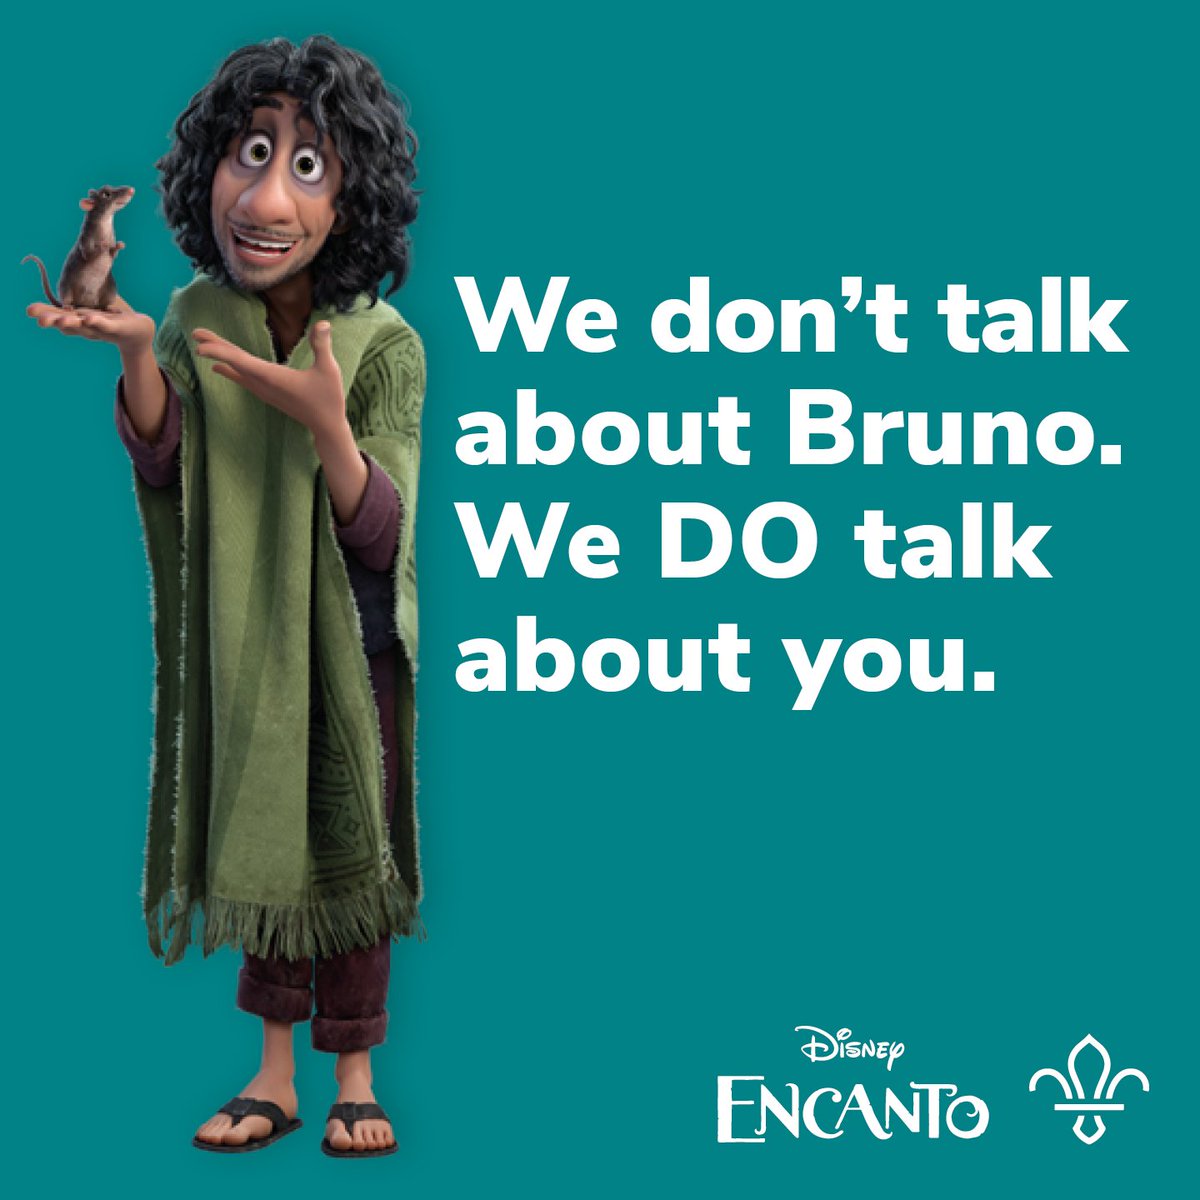 RT scouts 'This week is #MentalHealthAwareness week. It's a chance think about our own emotions and what they look like in this fun thoughtful Disney Encanto activity: We don't talk about Bruno. We DO talk about you. bit.ly/3VXqMuE '